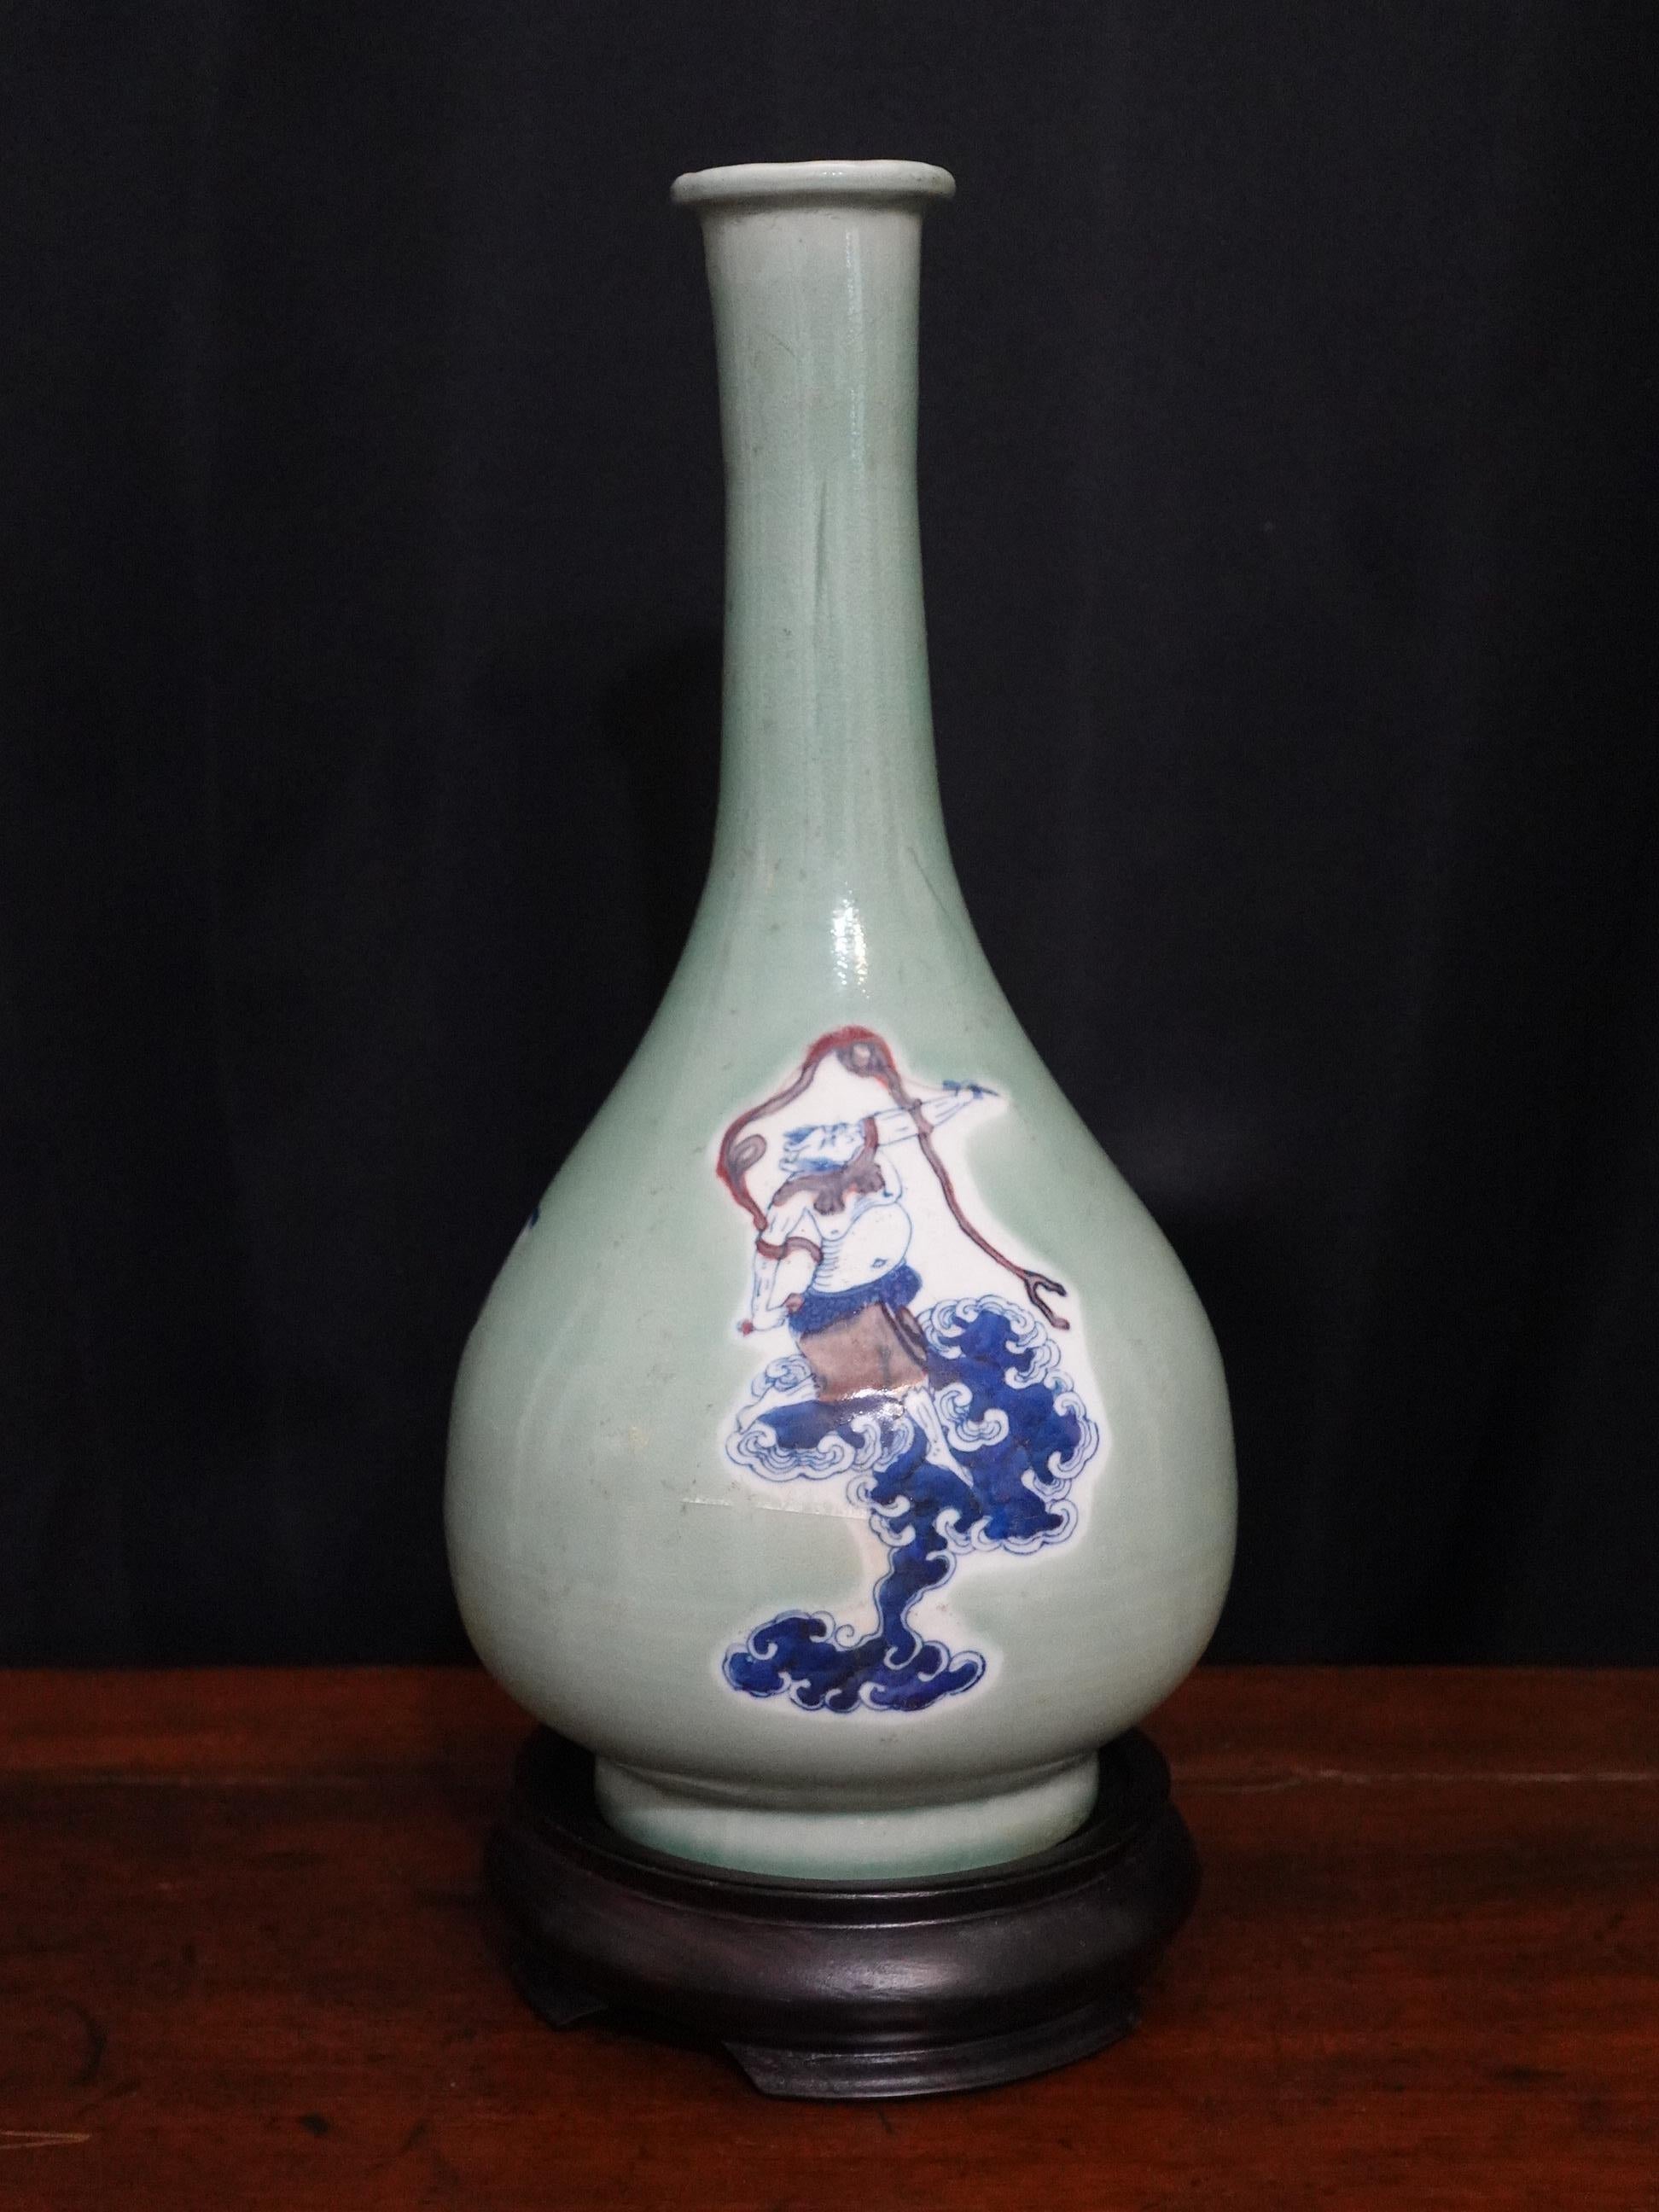 Chinese Blue White and Red Under-Glazed Long Neck Vase with Hardwood Stand.
Measures: Vase High is 12.5